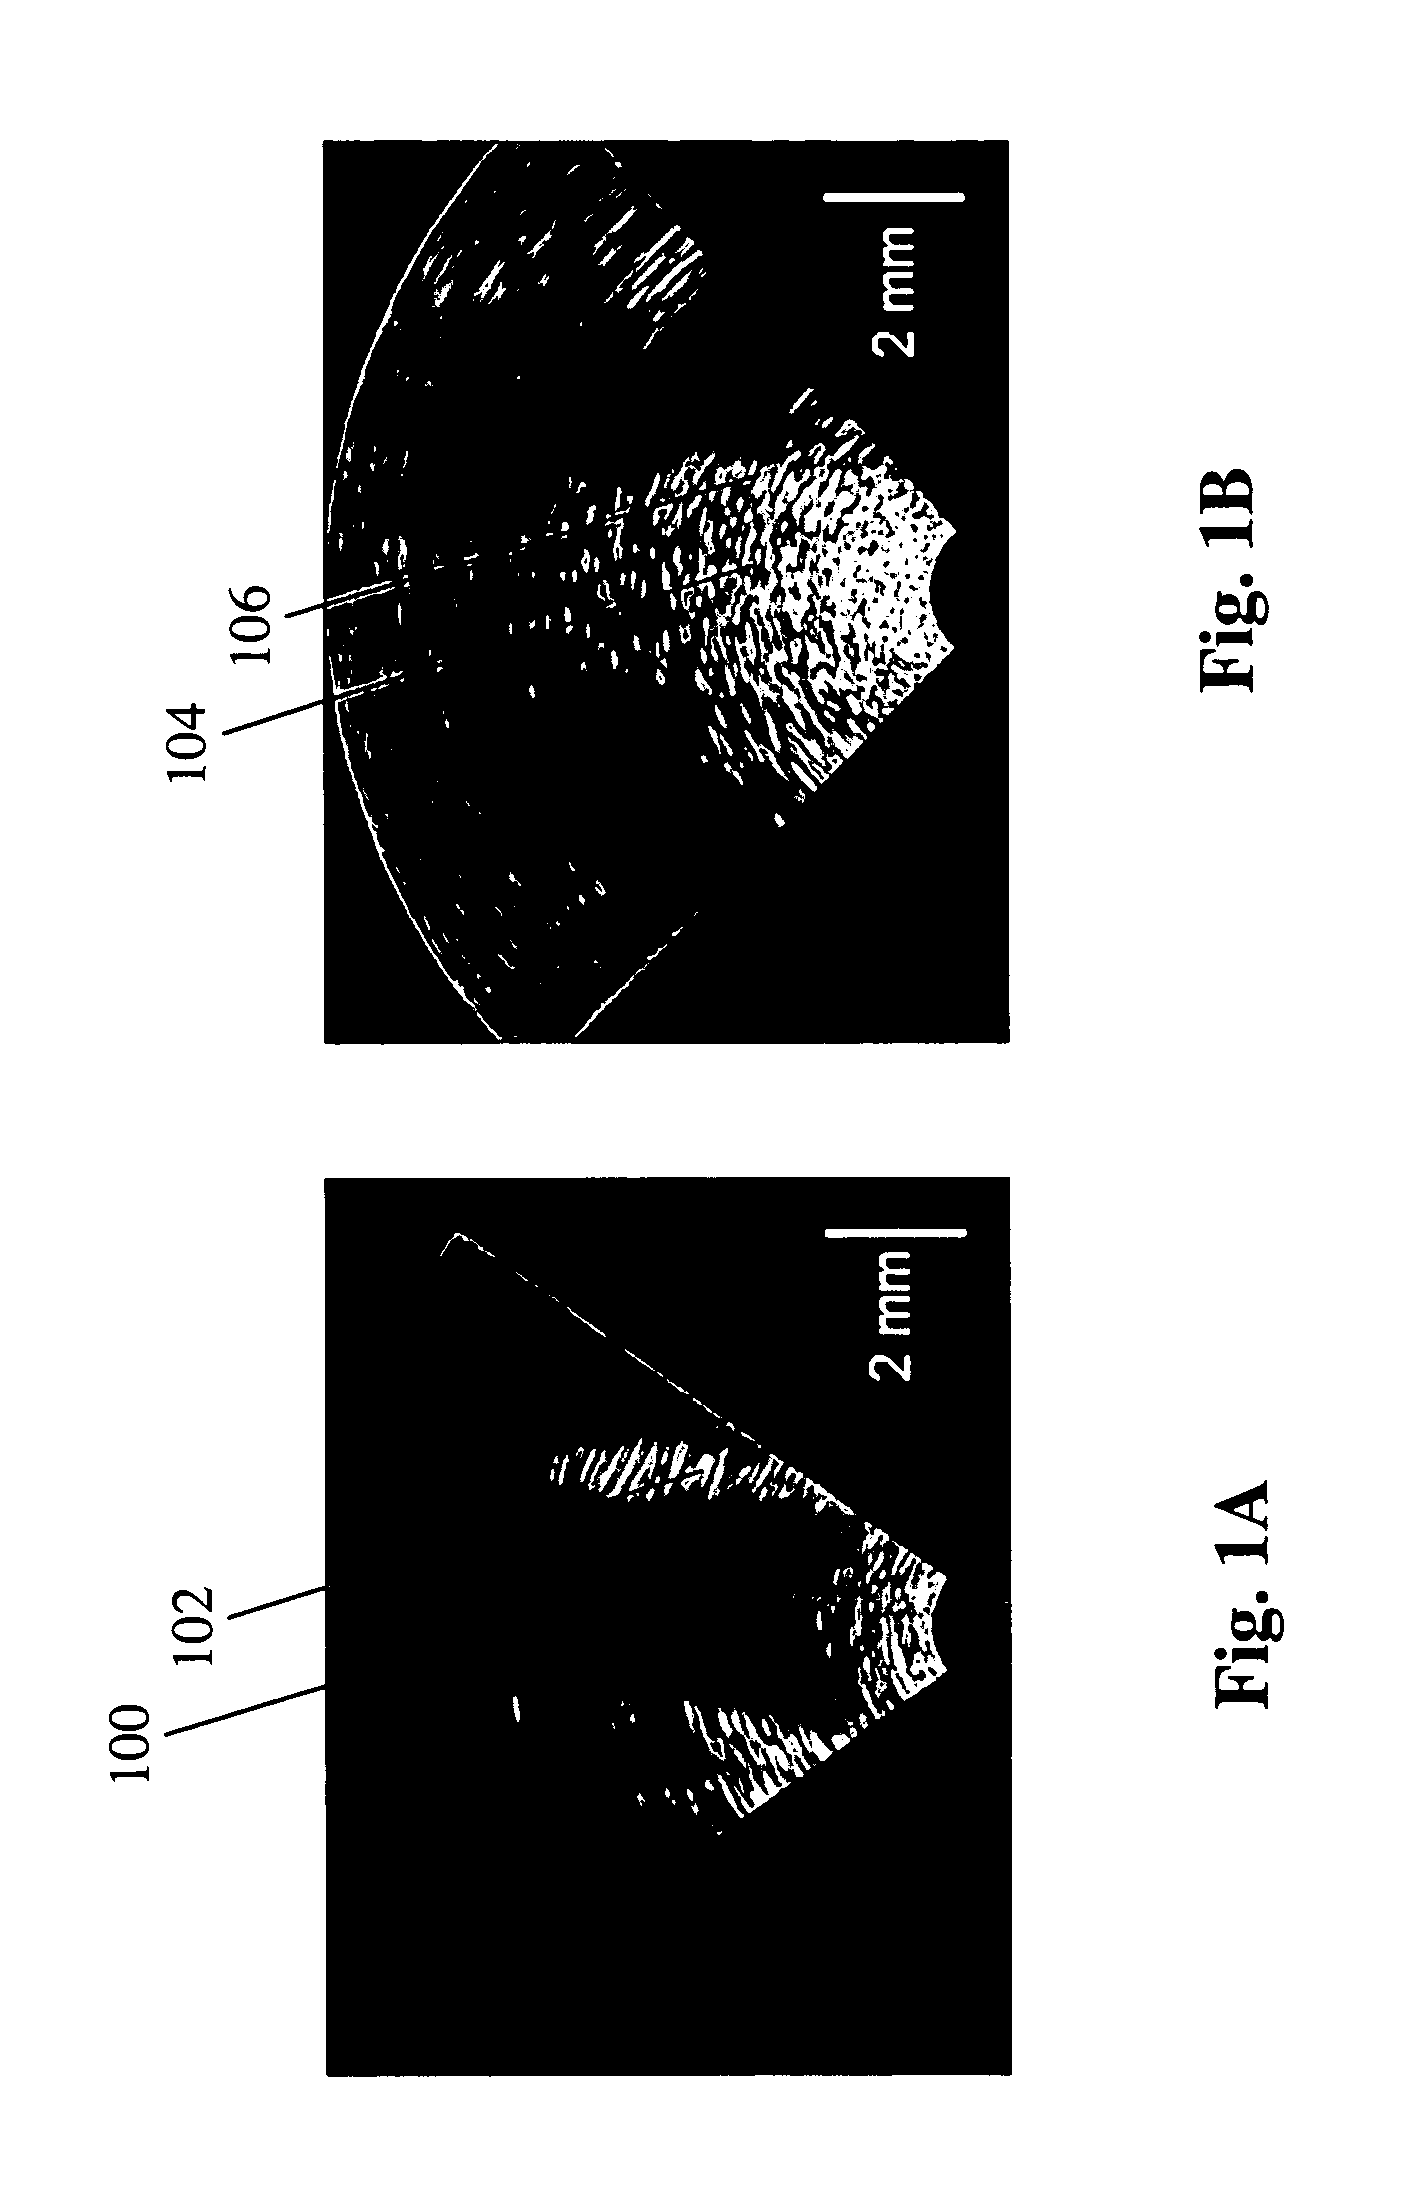 T-statistic method for suppressing artifacts in blood vessel ultrasonic imaging